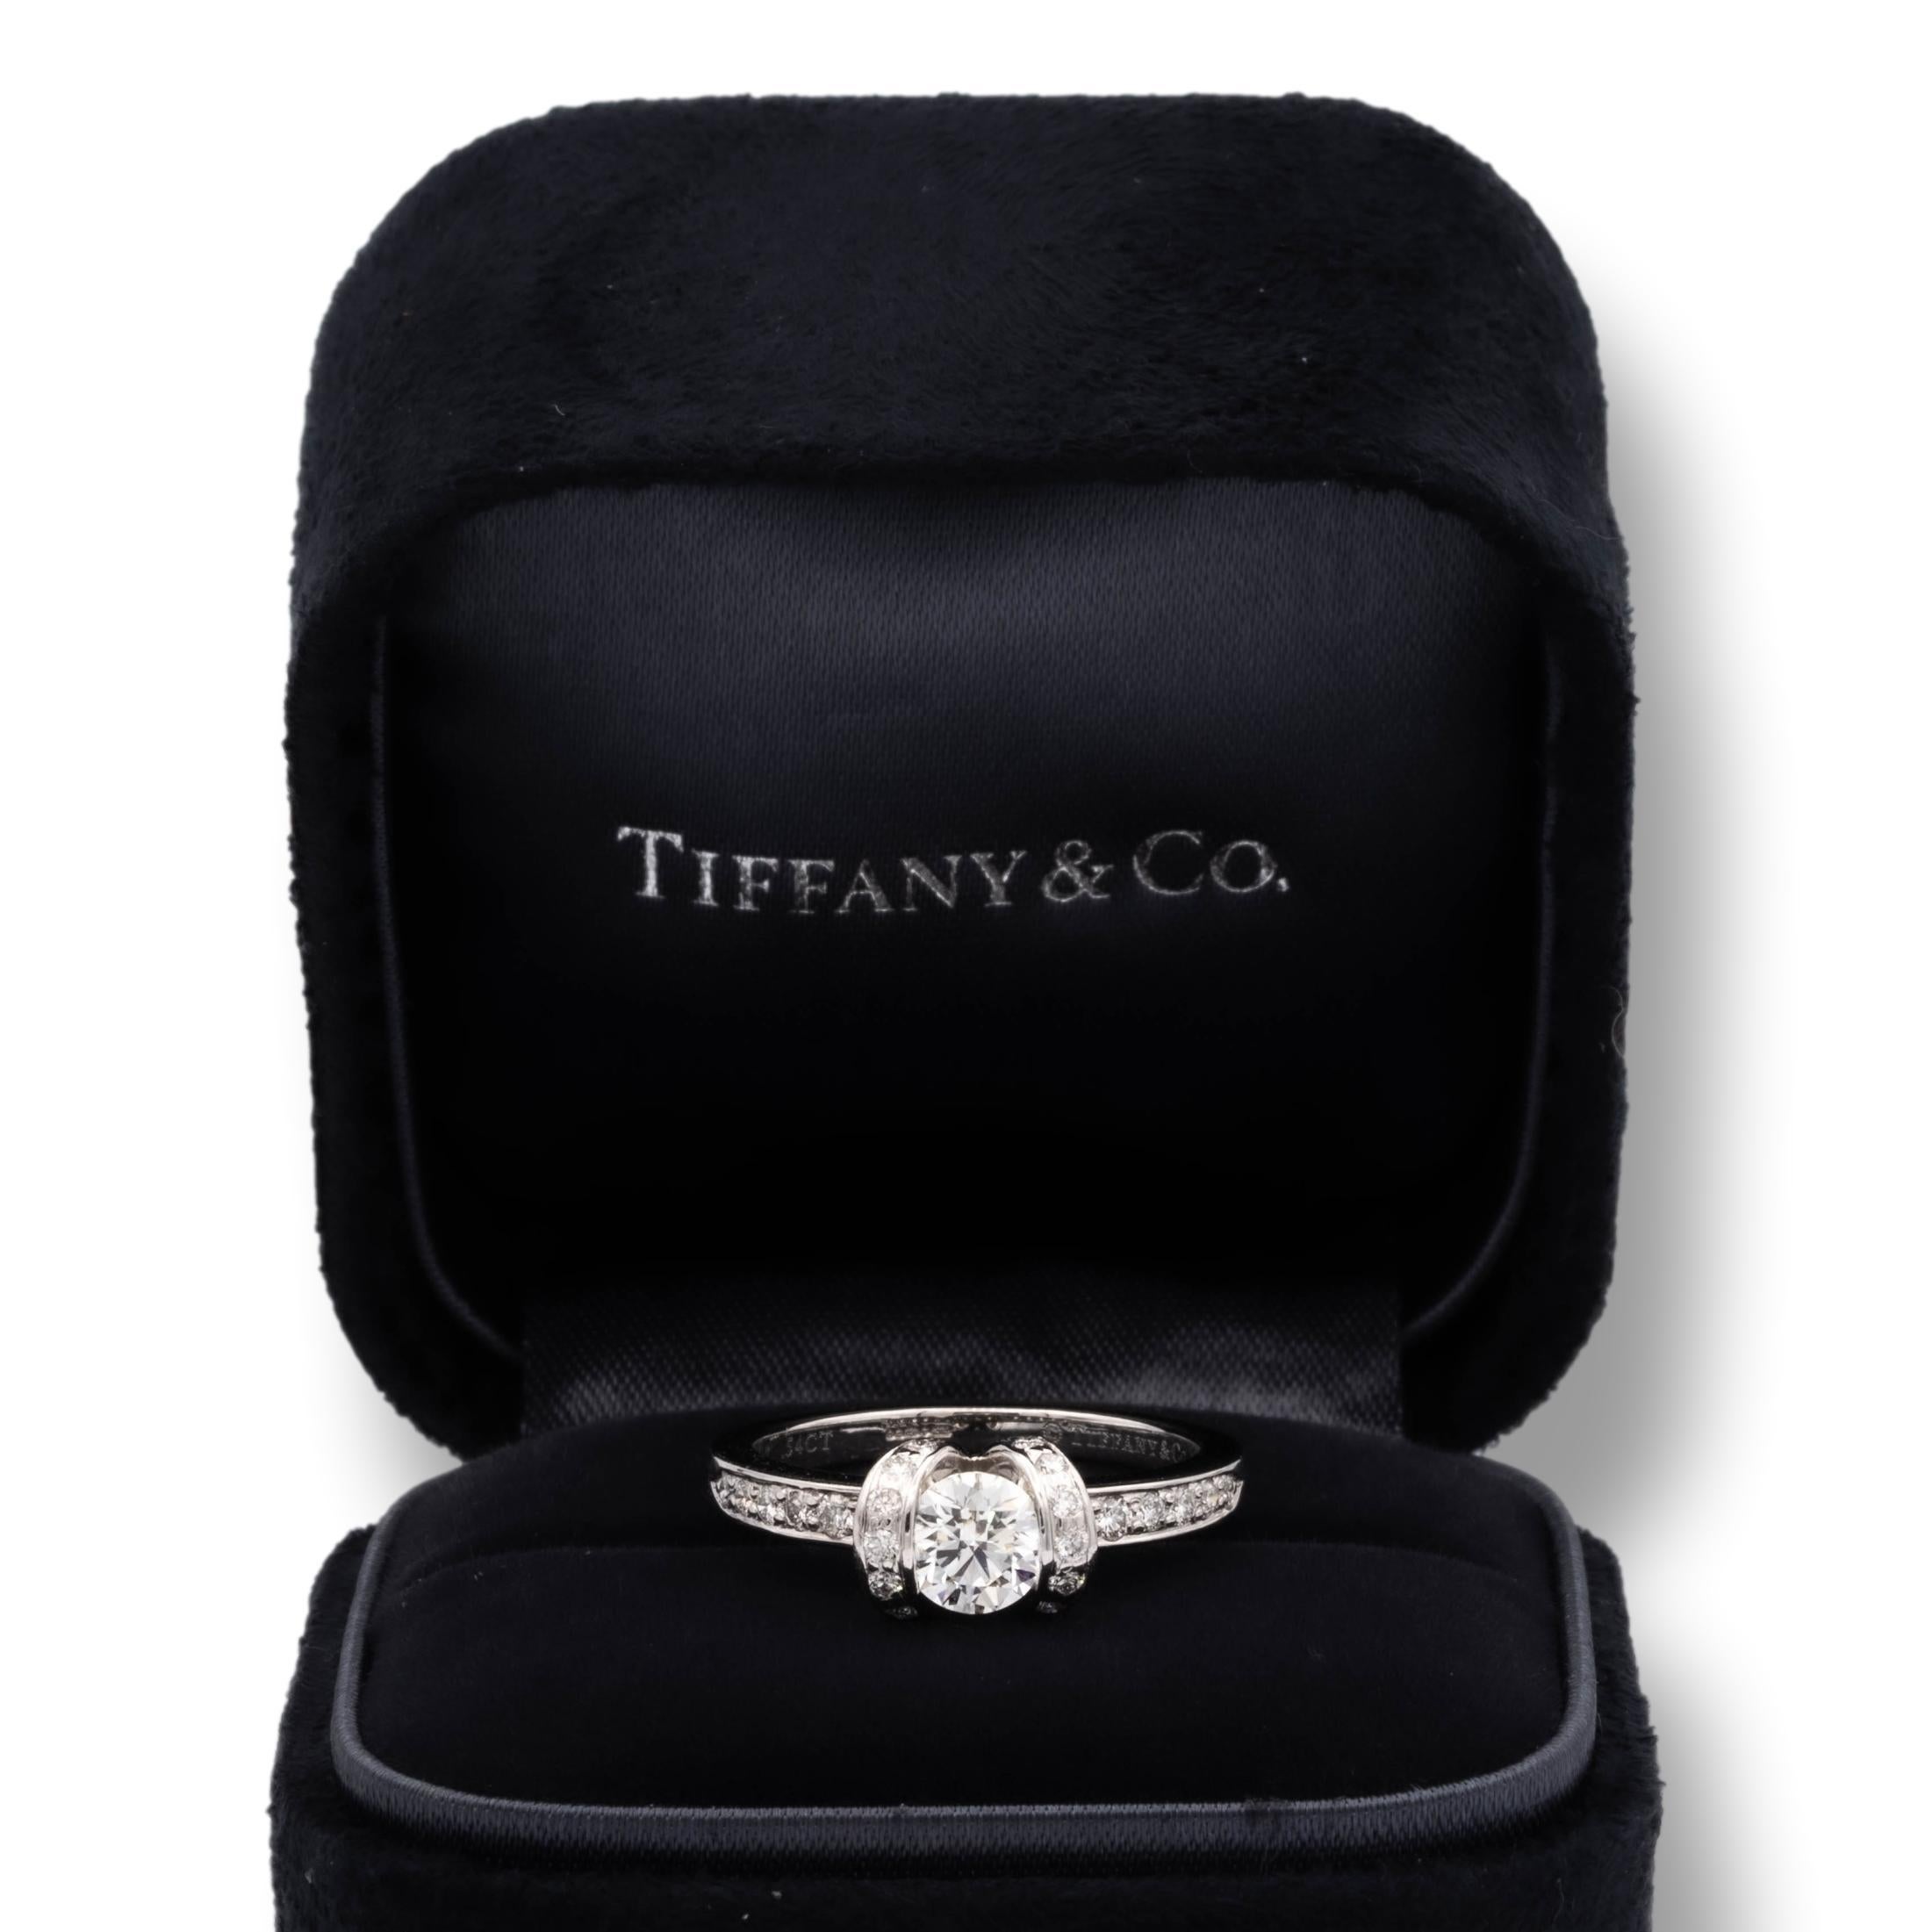 Tiffany & Co. Ribbon engagement ring finely crafted in platinum with a 0.54 ct round brilliant cut center diamond F color VVS1 clarity. The ring has channel set diamonds on each side weighing 0.36 carats total weight approximately.
The ring has been